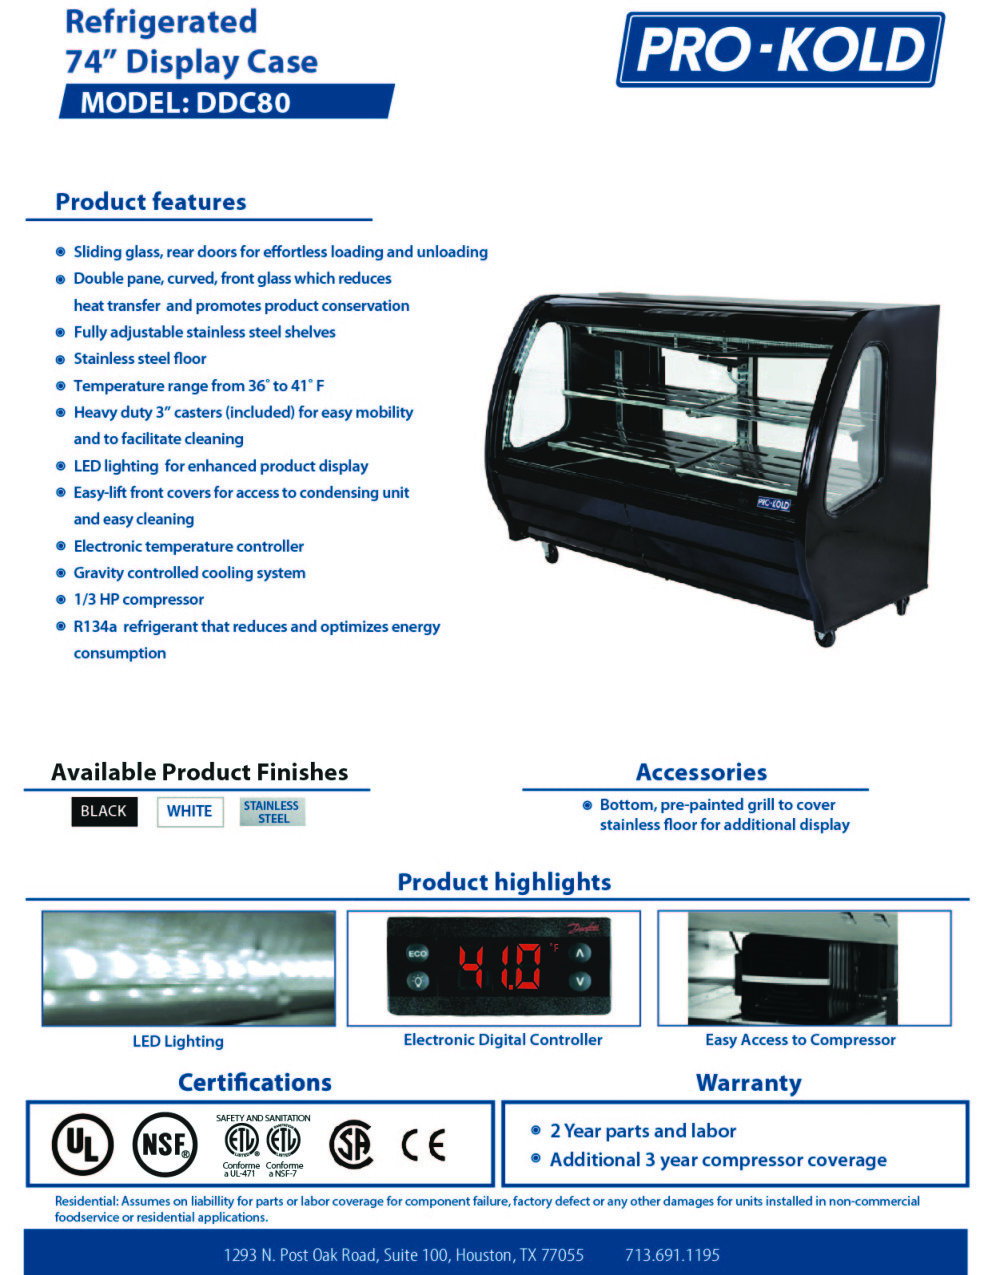 Pro-Kold DDC 80 SS Refrigerated Deli Display Case